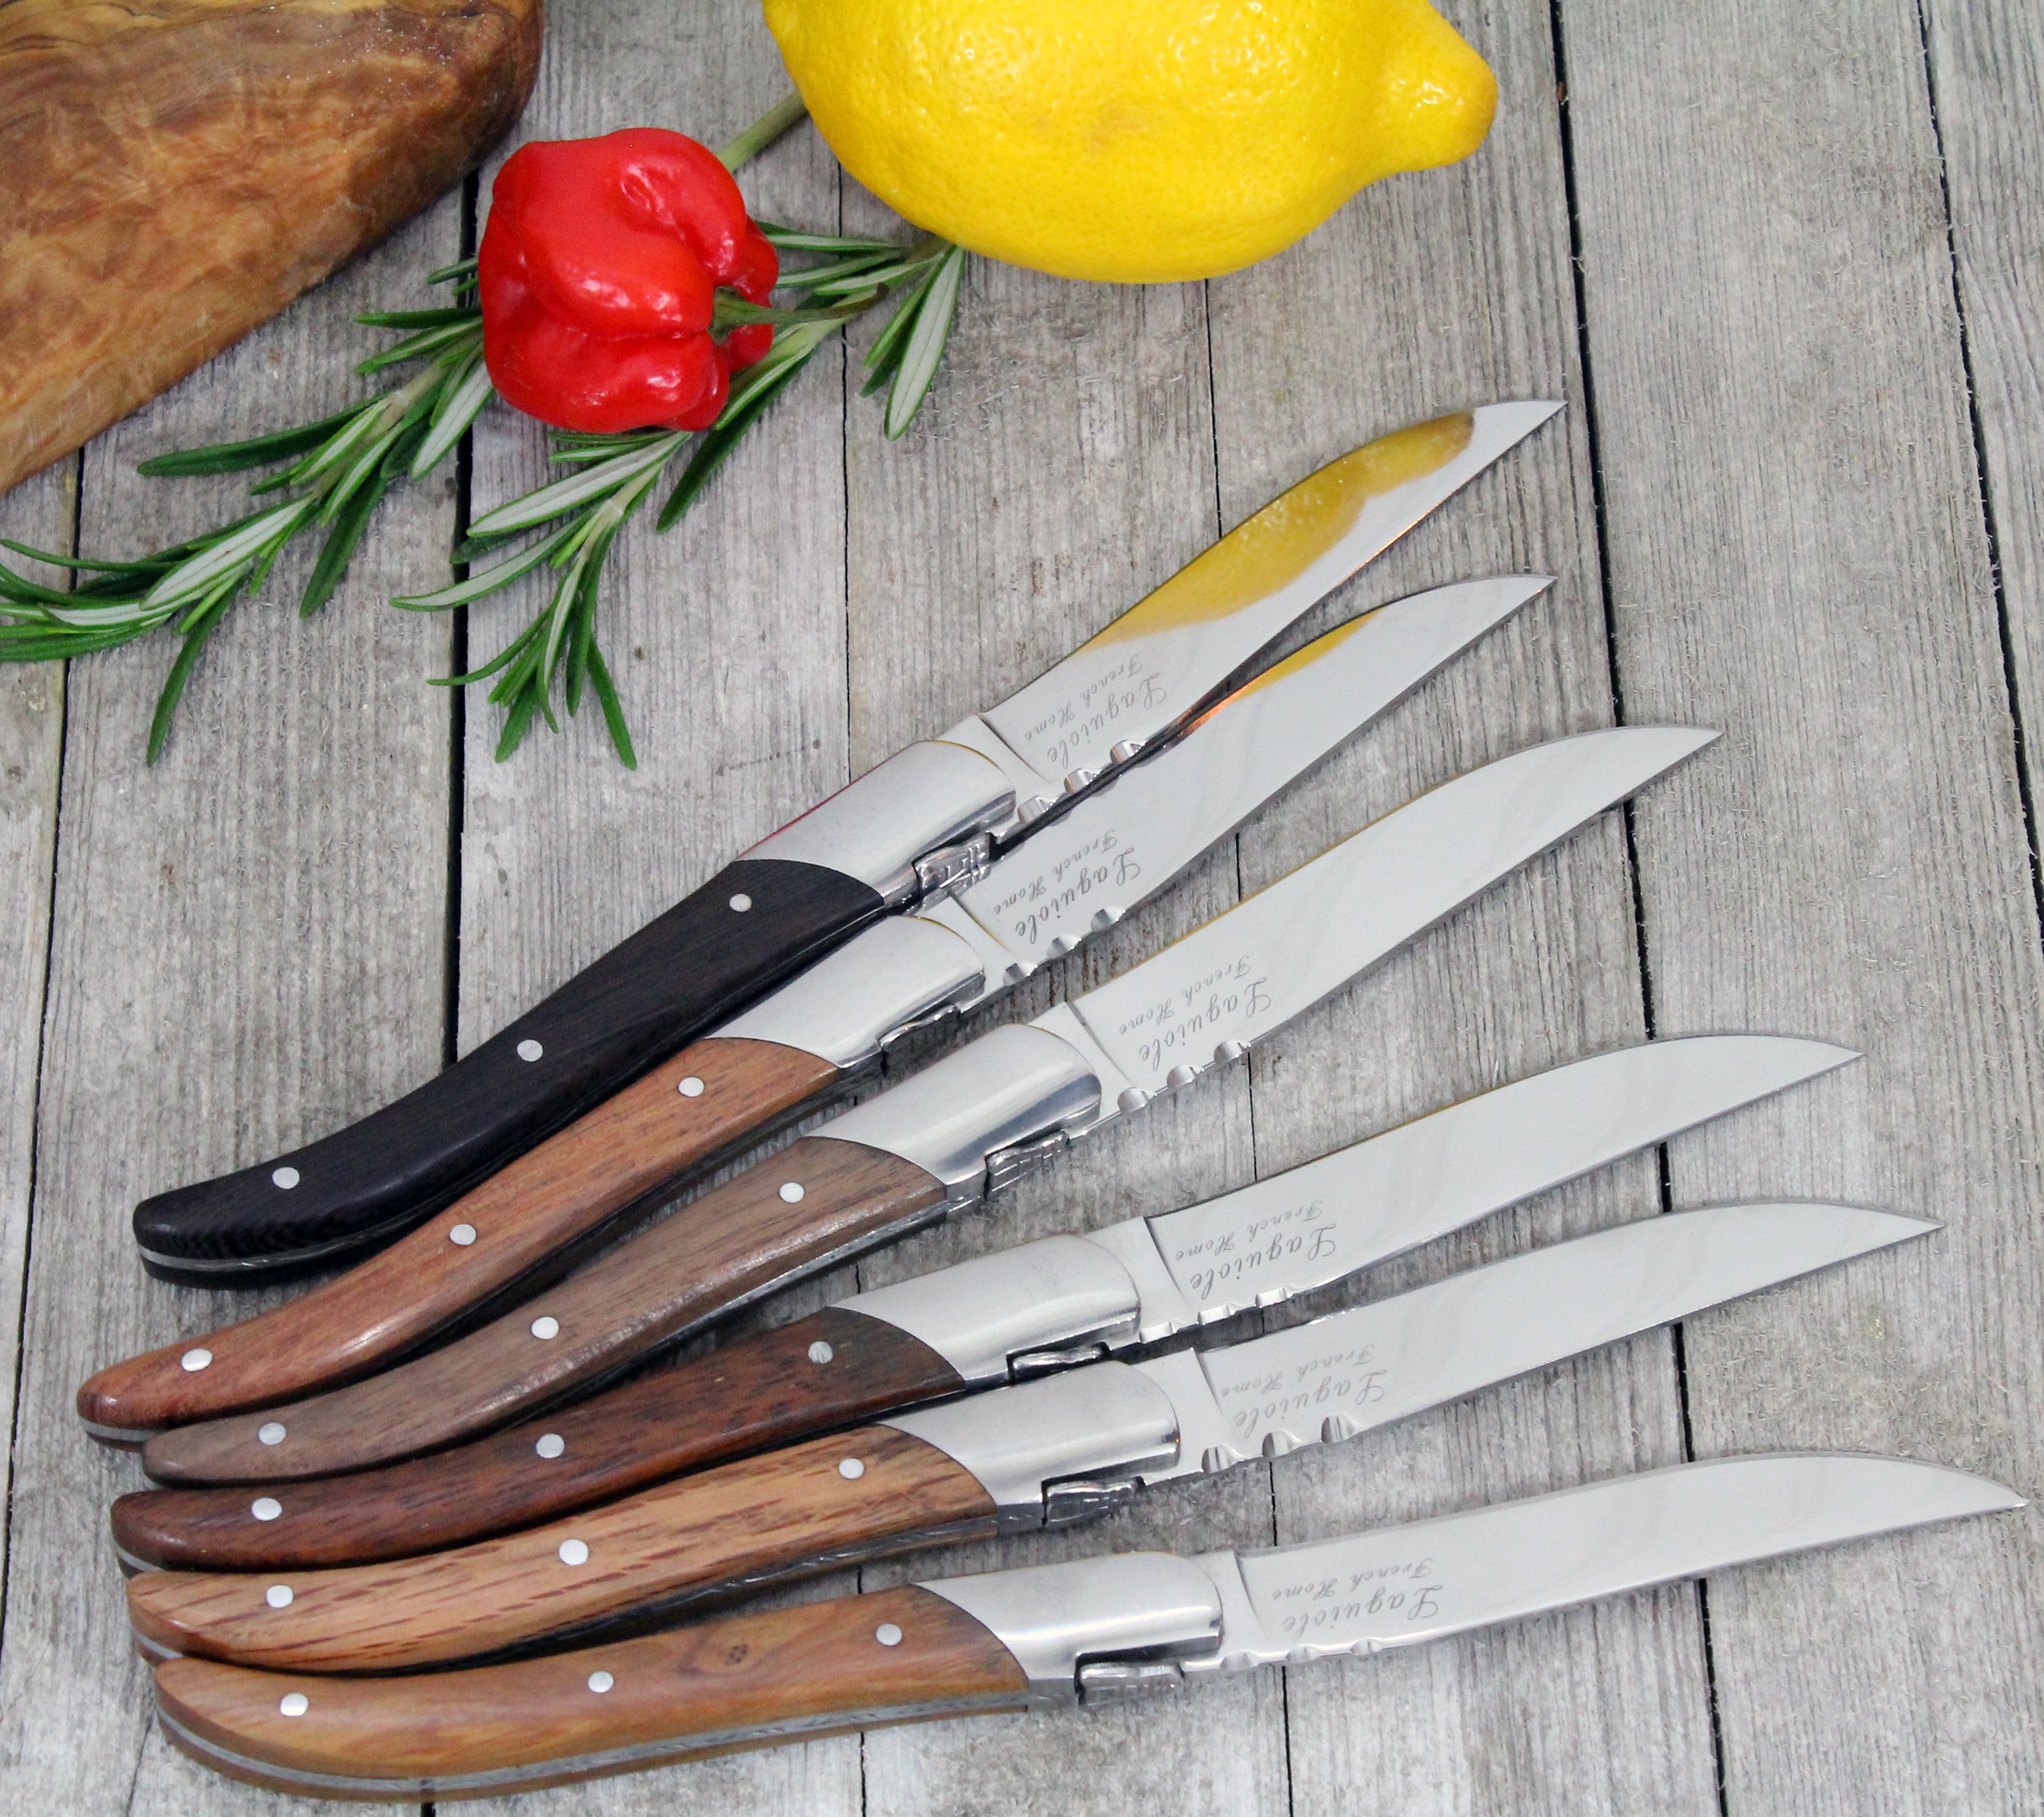 French Home 2 Piece Stainless Steel Assorted Knife Set & Reviews